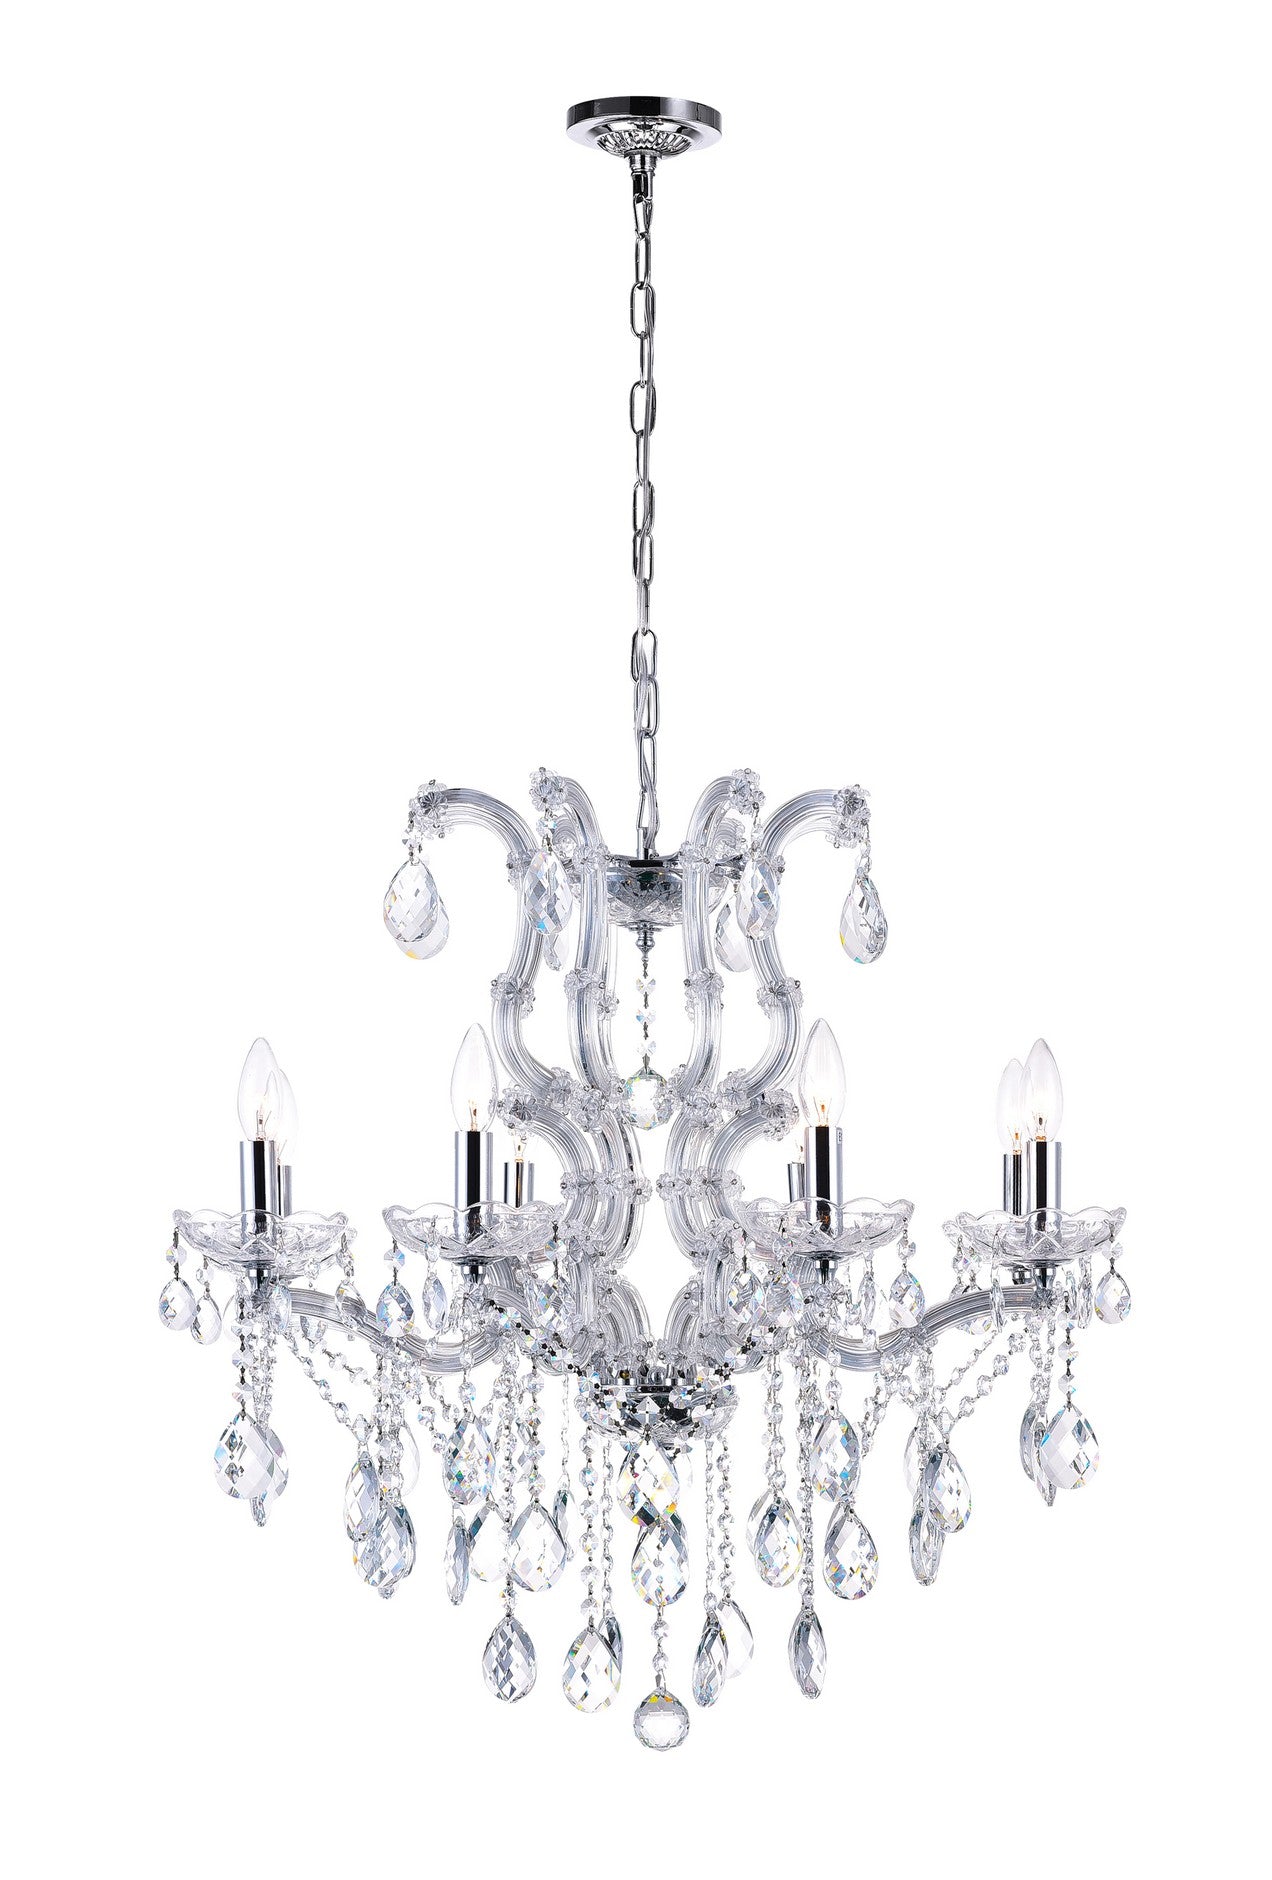 8 LIGHT UP CHANDELIER WITH CHROME FINISH - Dreamart Gallery